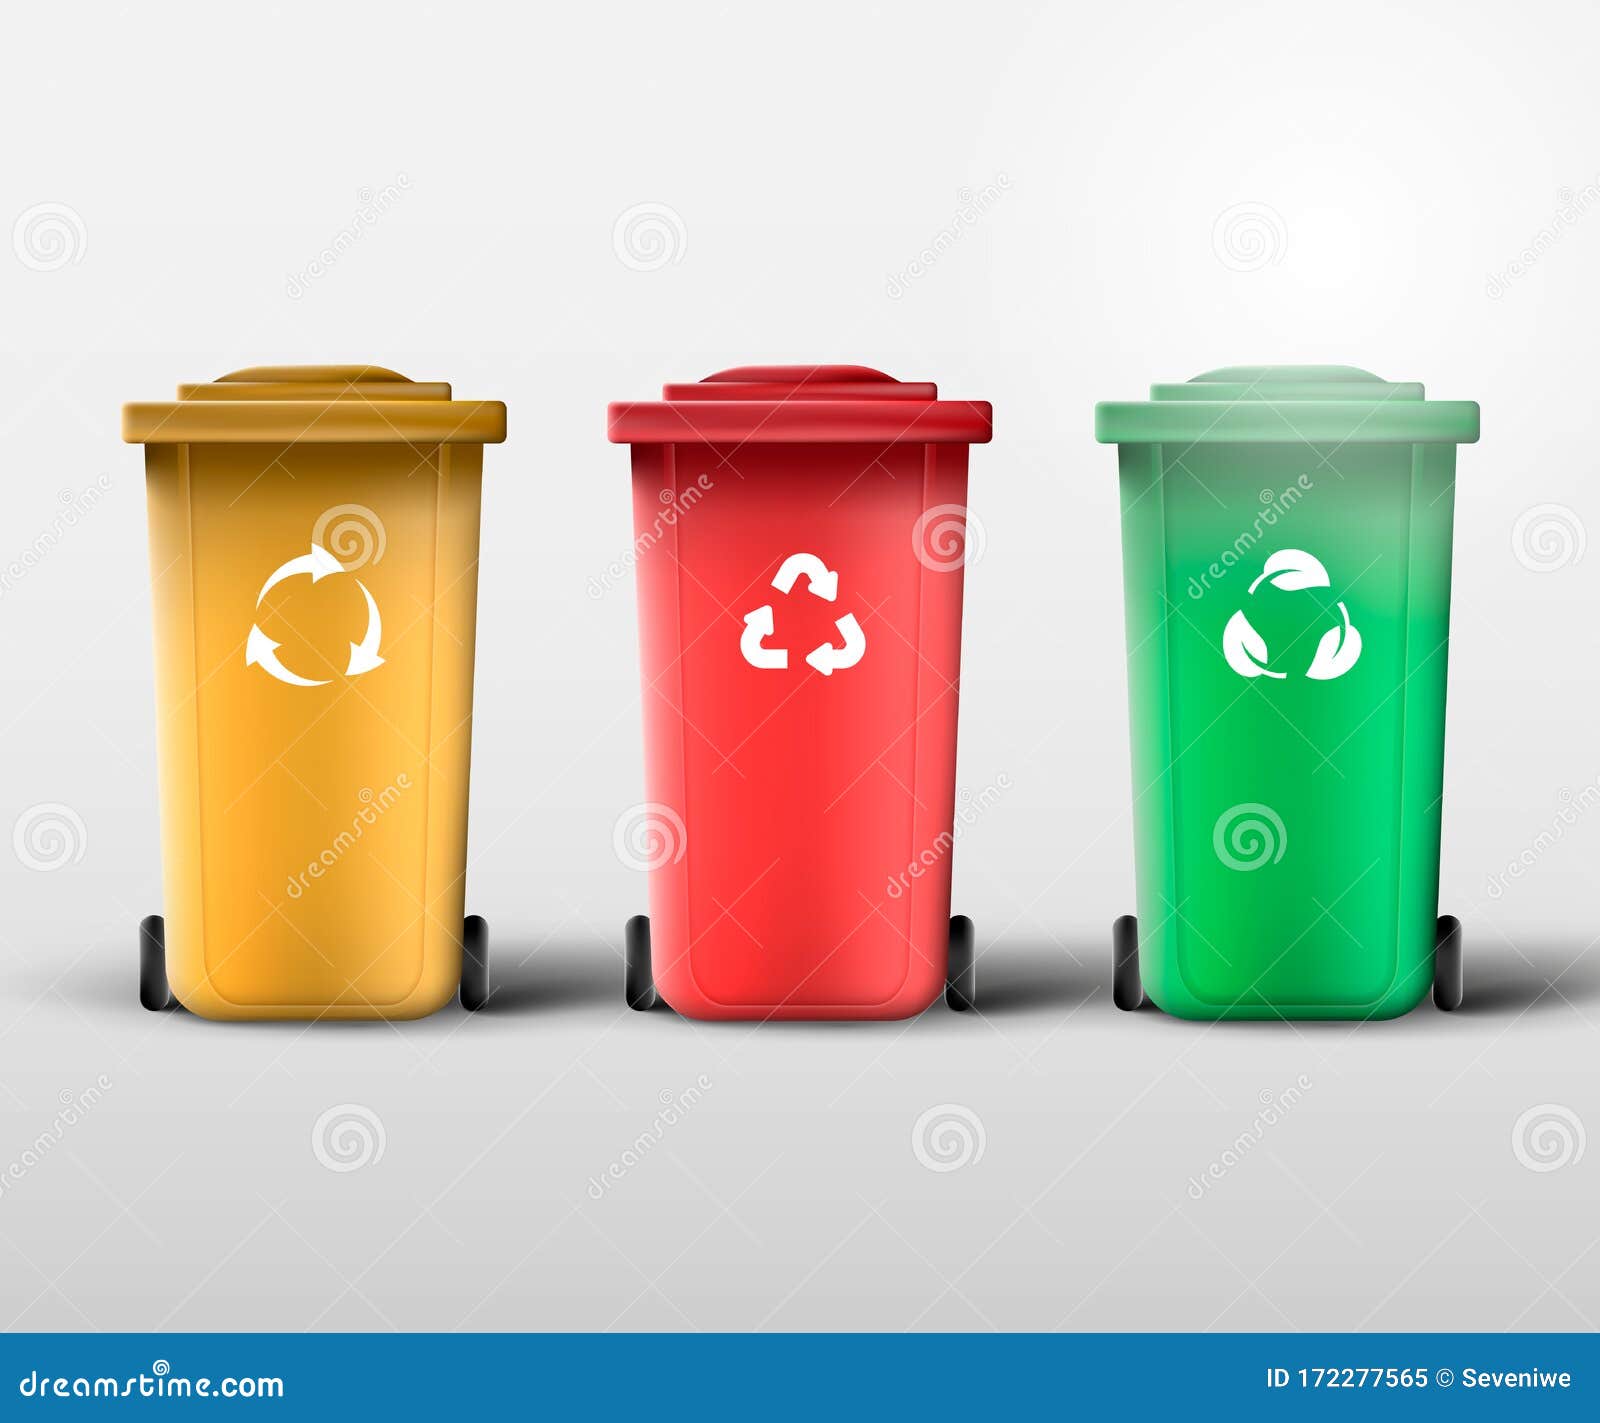 biodegradable and nonbiodegradable waste management